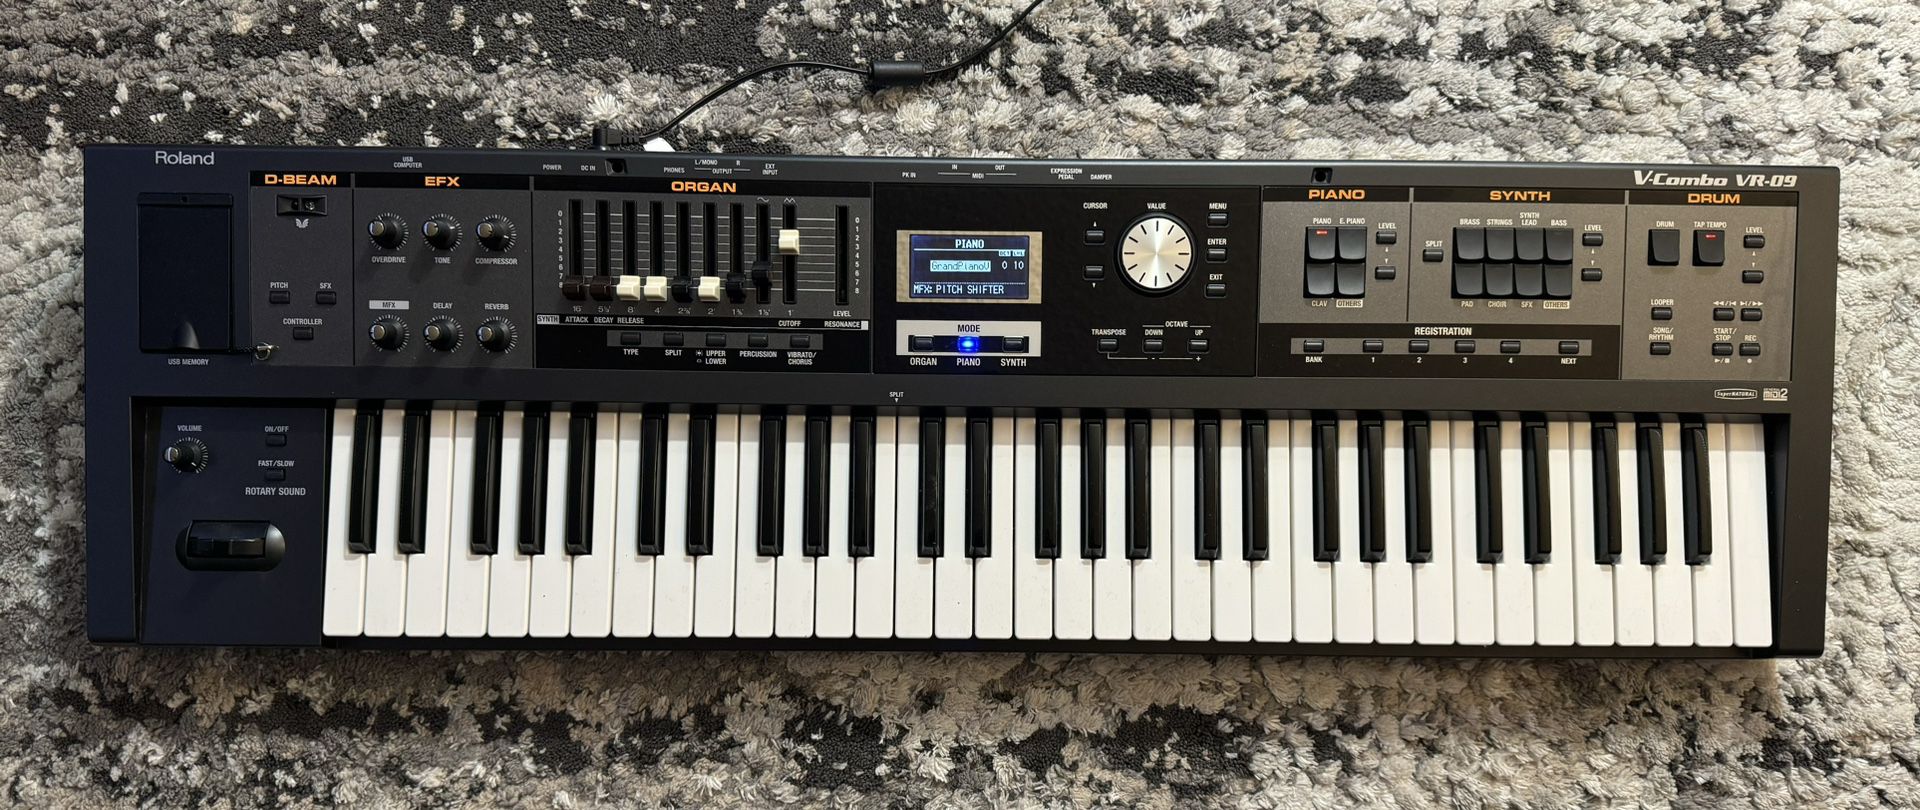 Roland V-Combo VR-09 Live Performance Keyboard Synthesizer with Power Cable